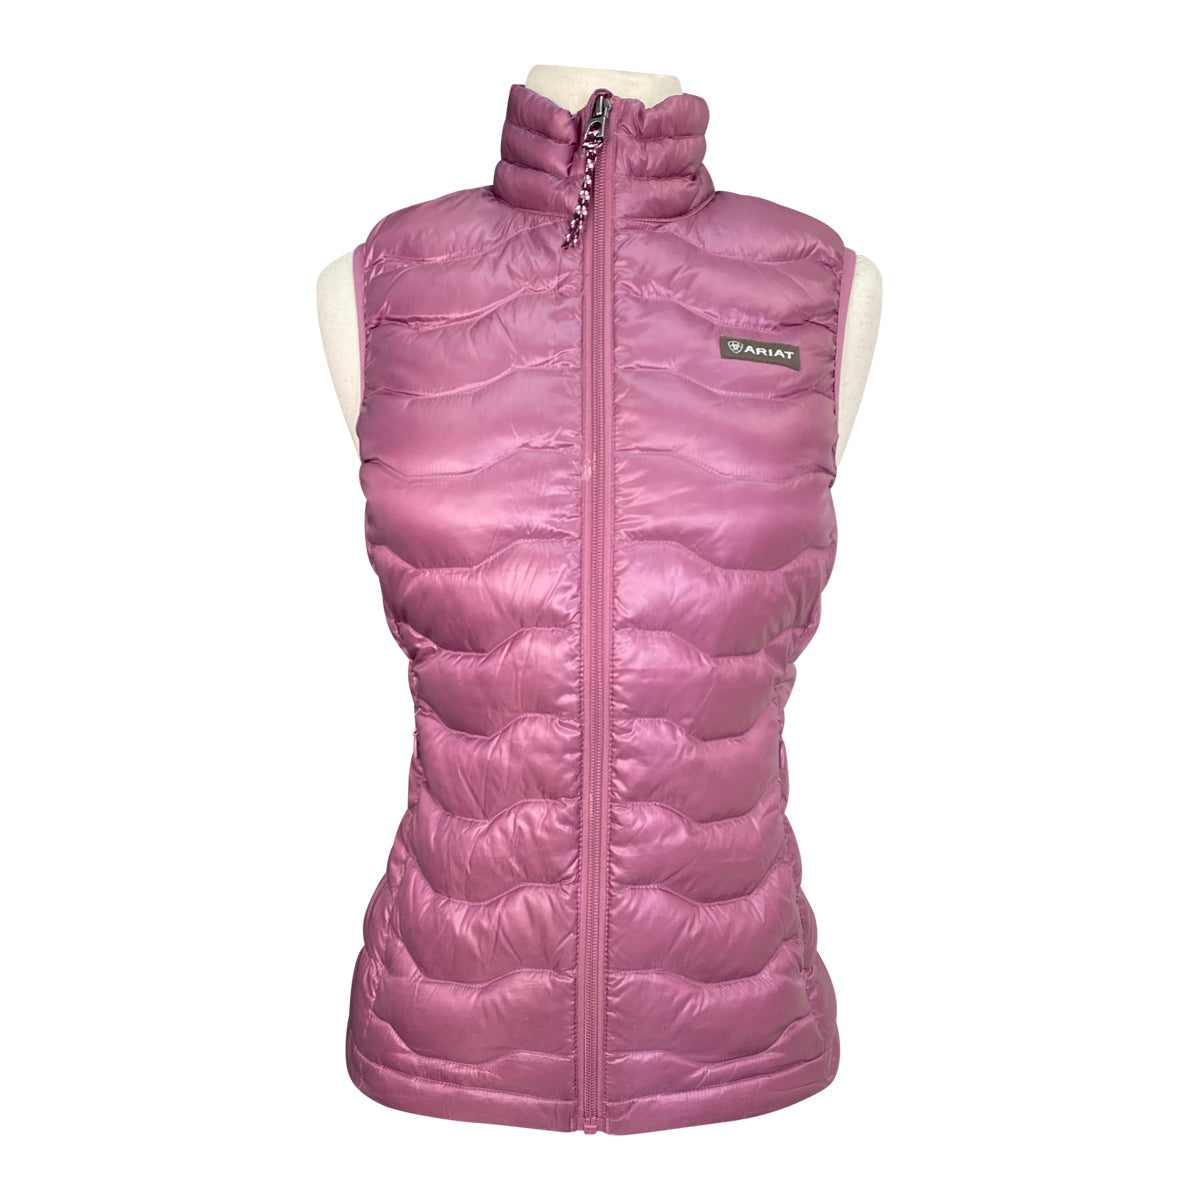 Ariat Ideal 3.0 Down Vest in Cotton Candy 